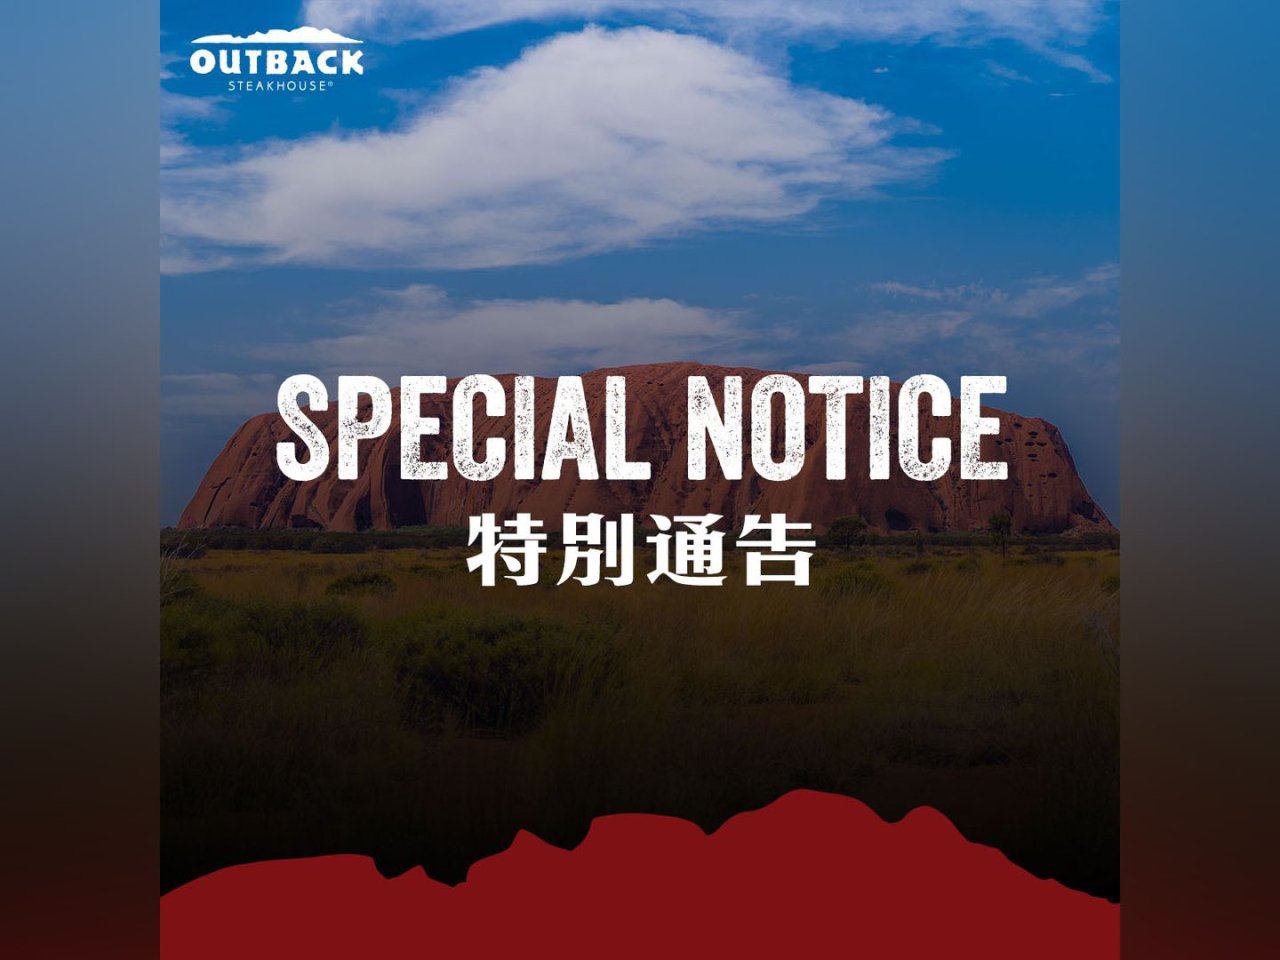 Outback Steakhouse to shut down 9 Hong Kong outlets